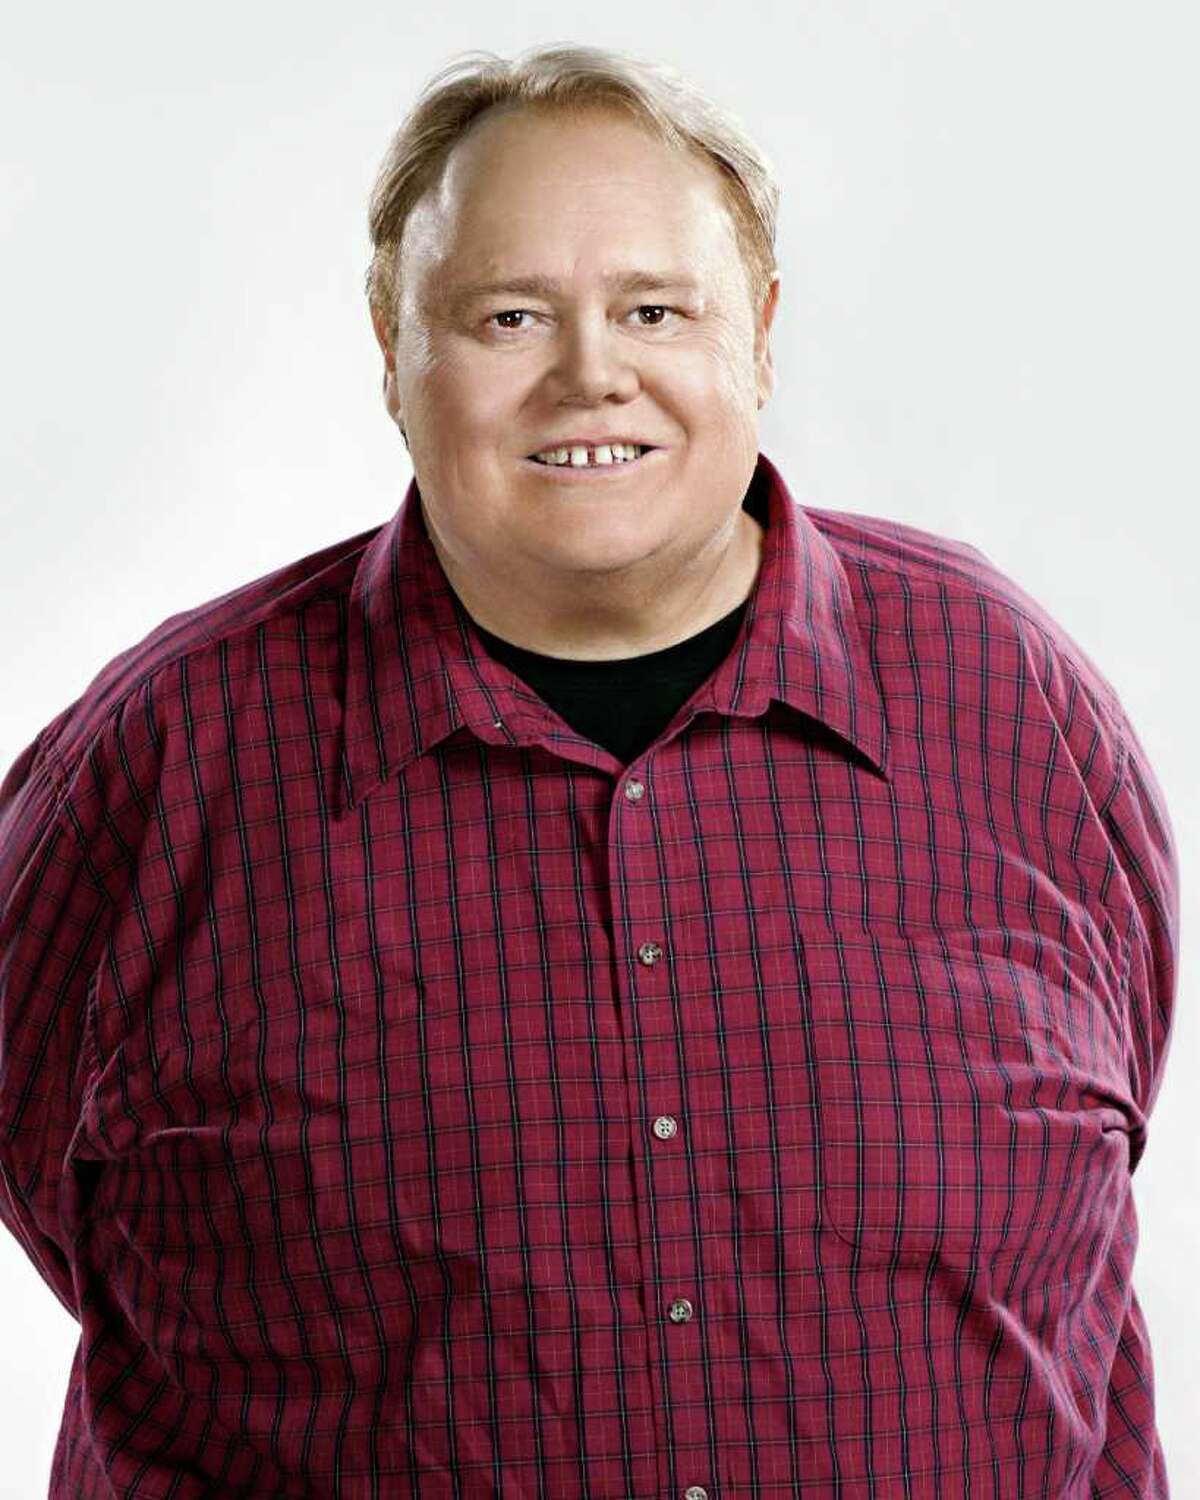 Louie Anderson brings his comedy to The Egg